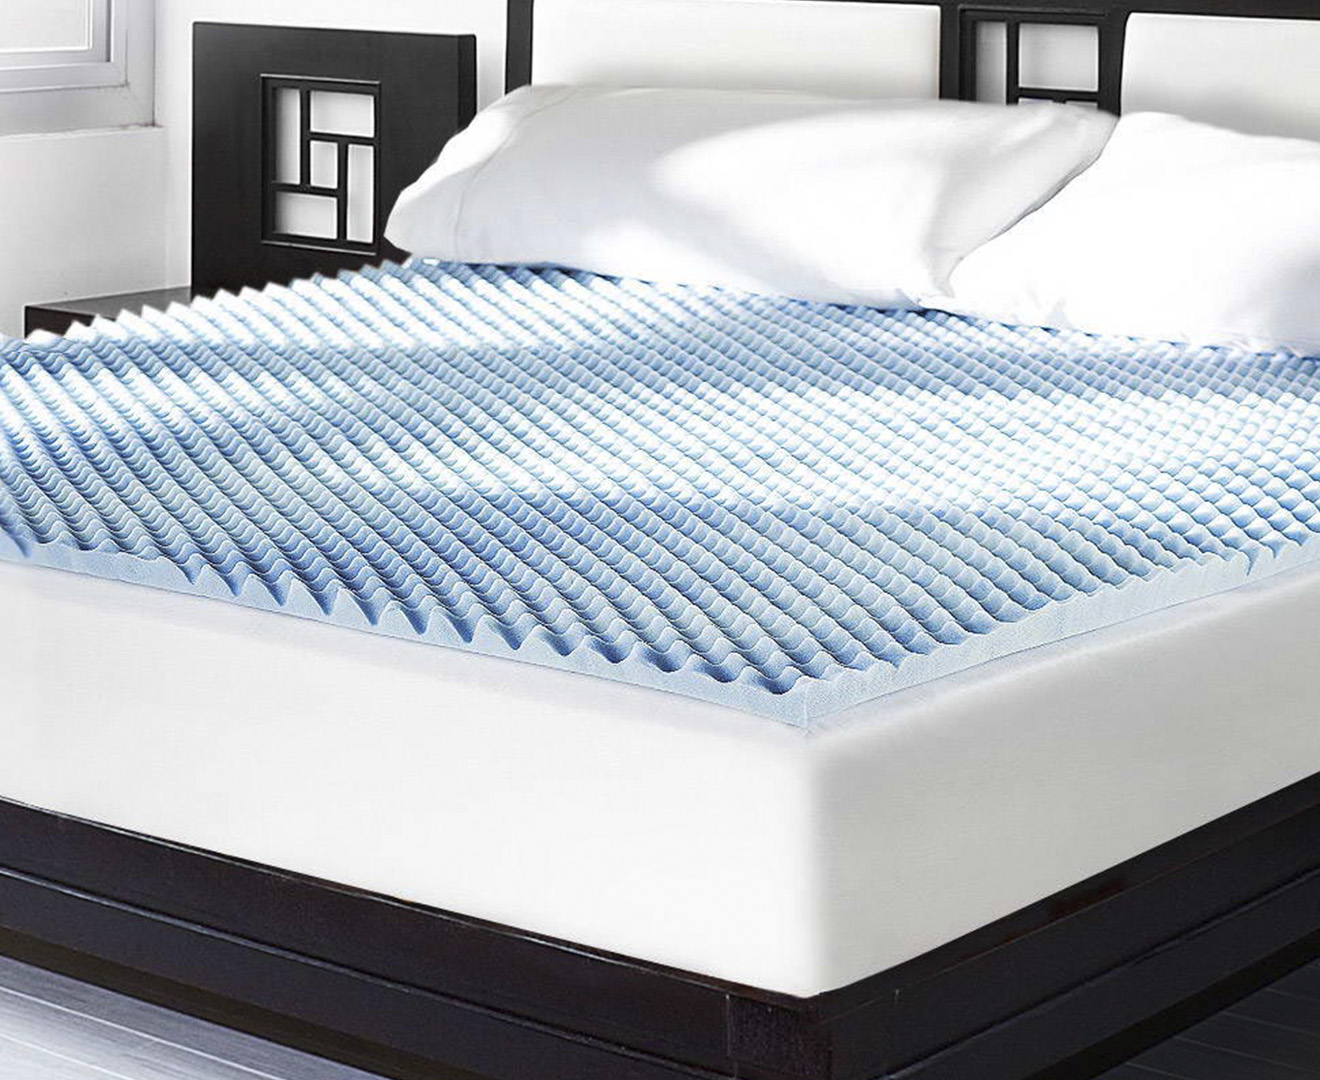 egg crate mattress king size bed